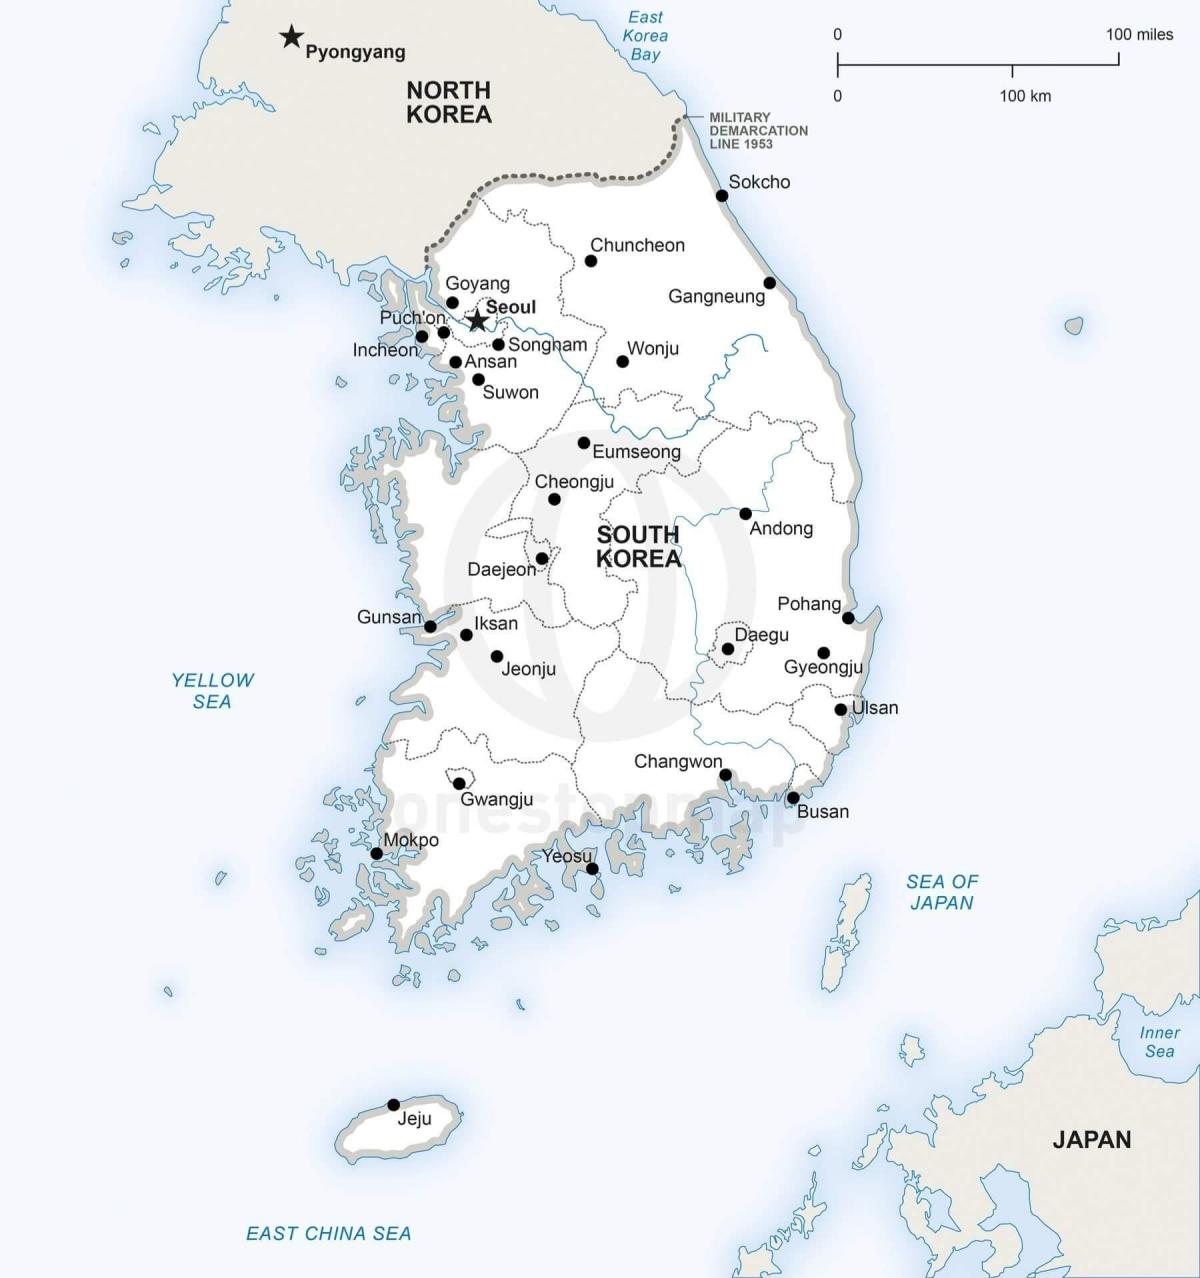 Map of South Korea (ROK) with main cities